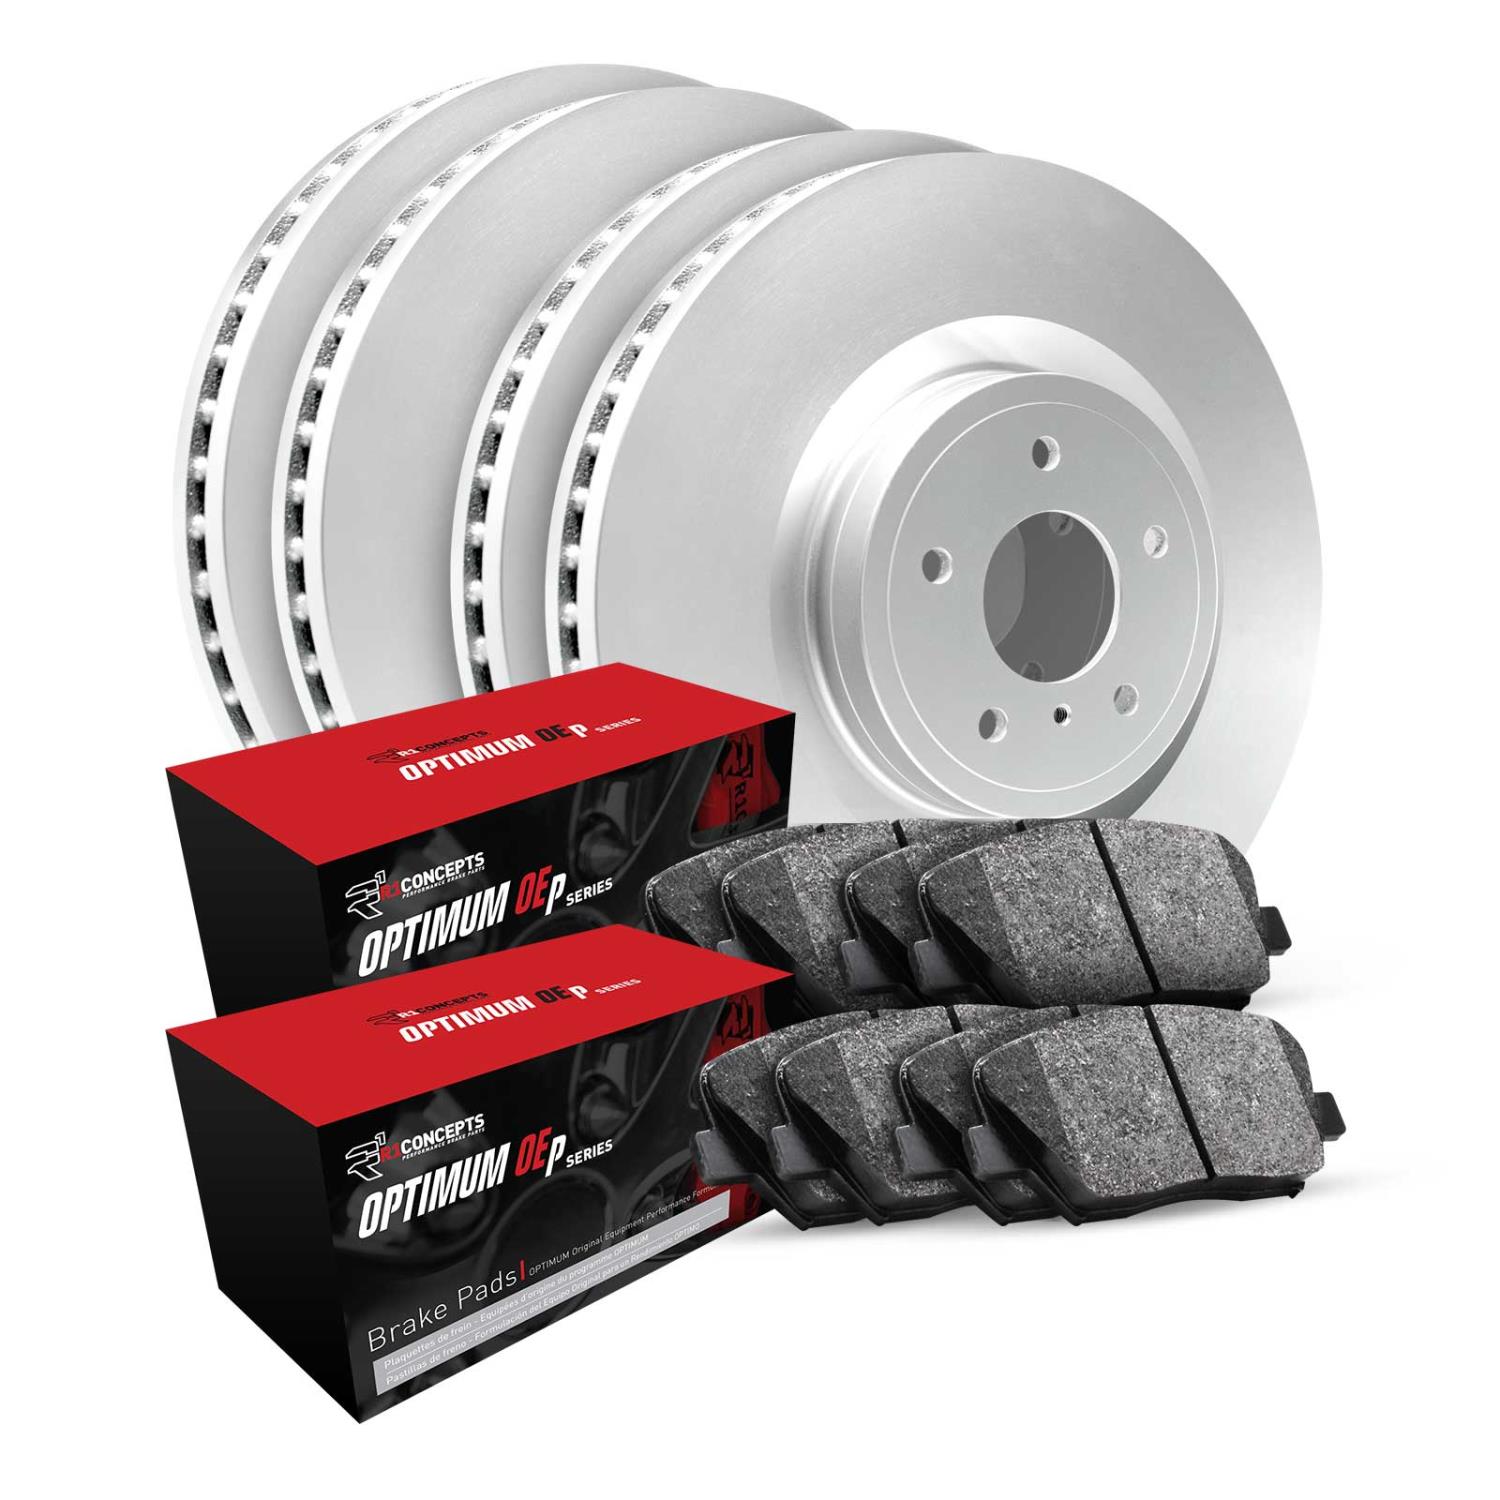 GEO-Carbon Brake Rotor & Drum Set w/Optimum OE Pads & Shoes, 2013-2021 Fits Multiple Makes/Models, Position: Front & Rear